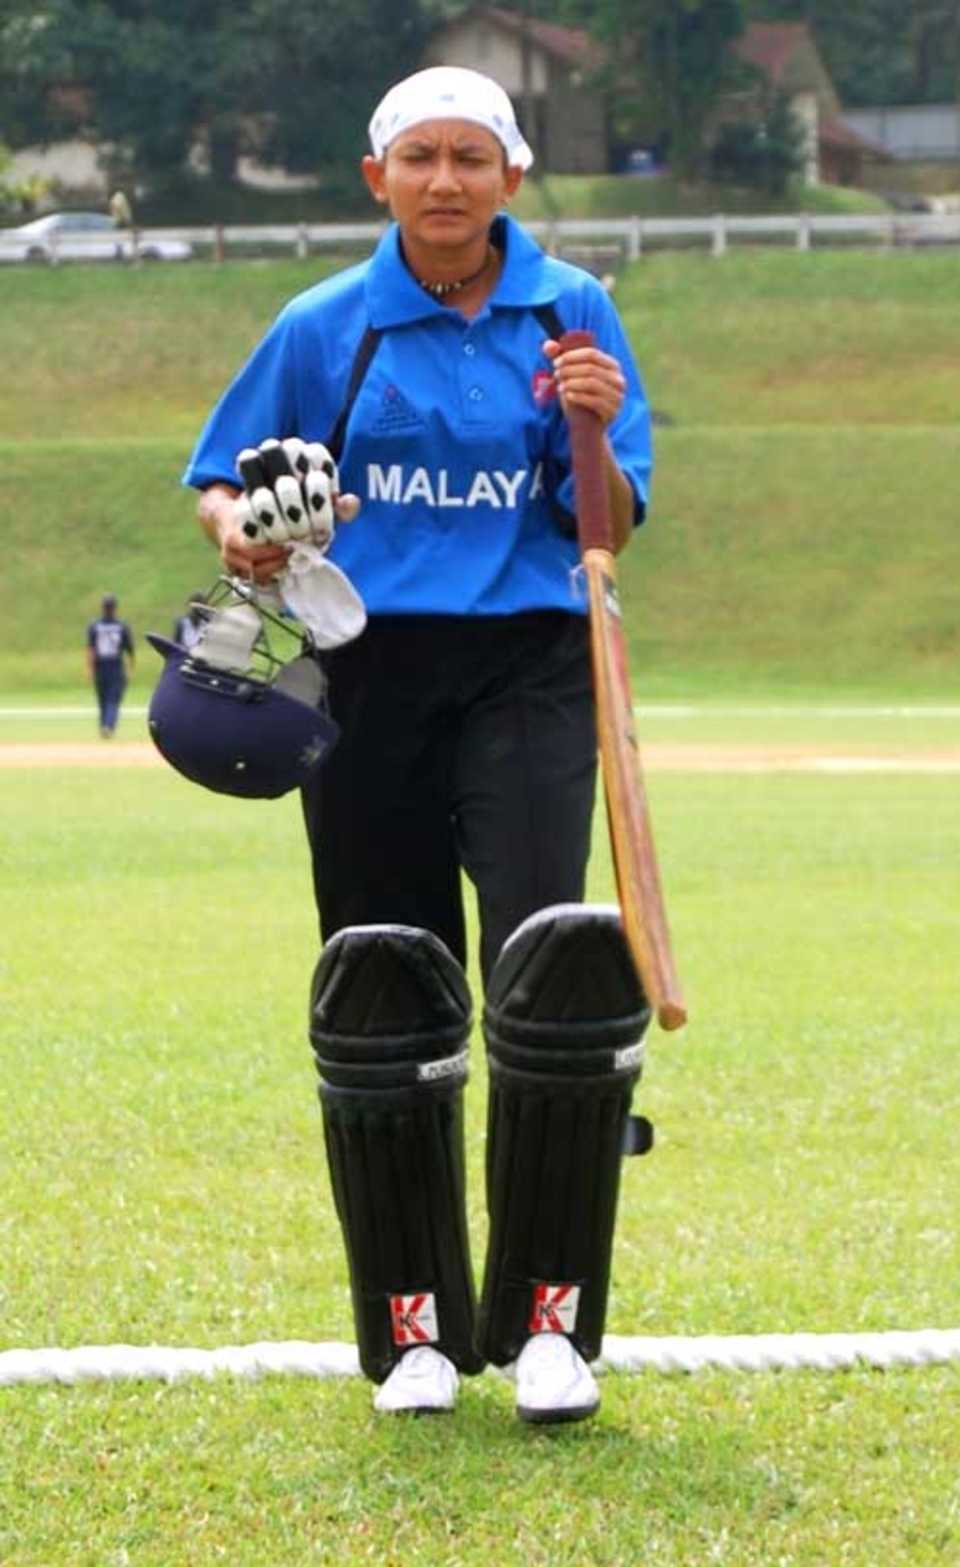 Arina Rahim, the Malaysian captain, after her side won their game against Thailand by 61 runs